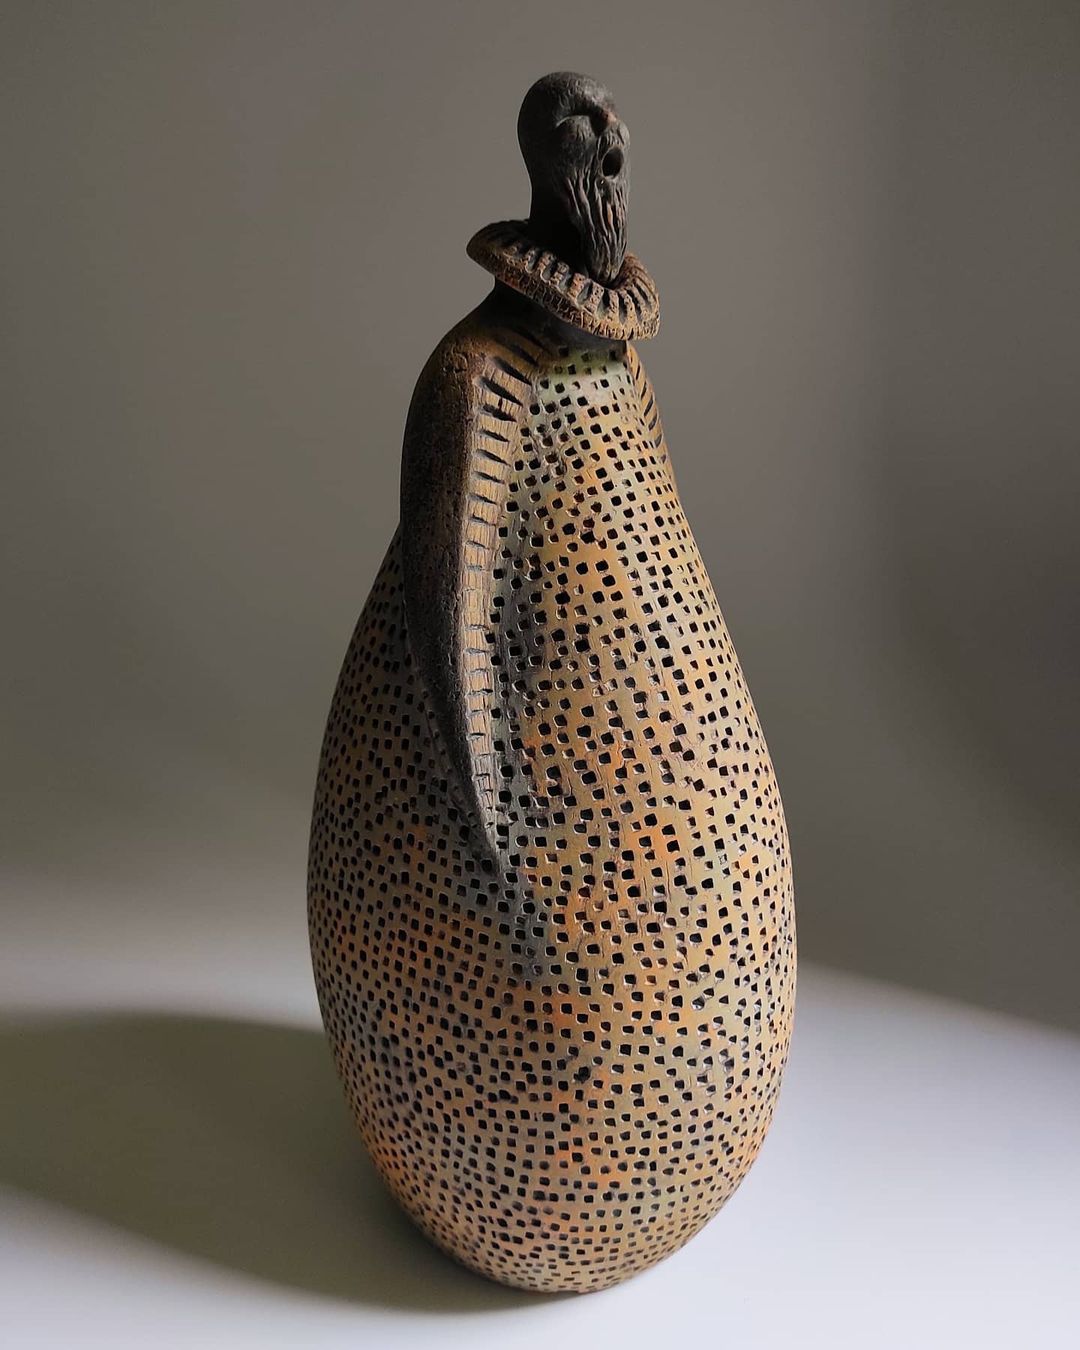 Abstract Figurative Ceramic Sculptures By Carlos Cabo (6)